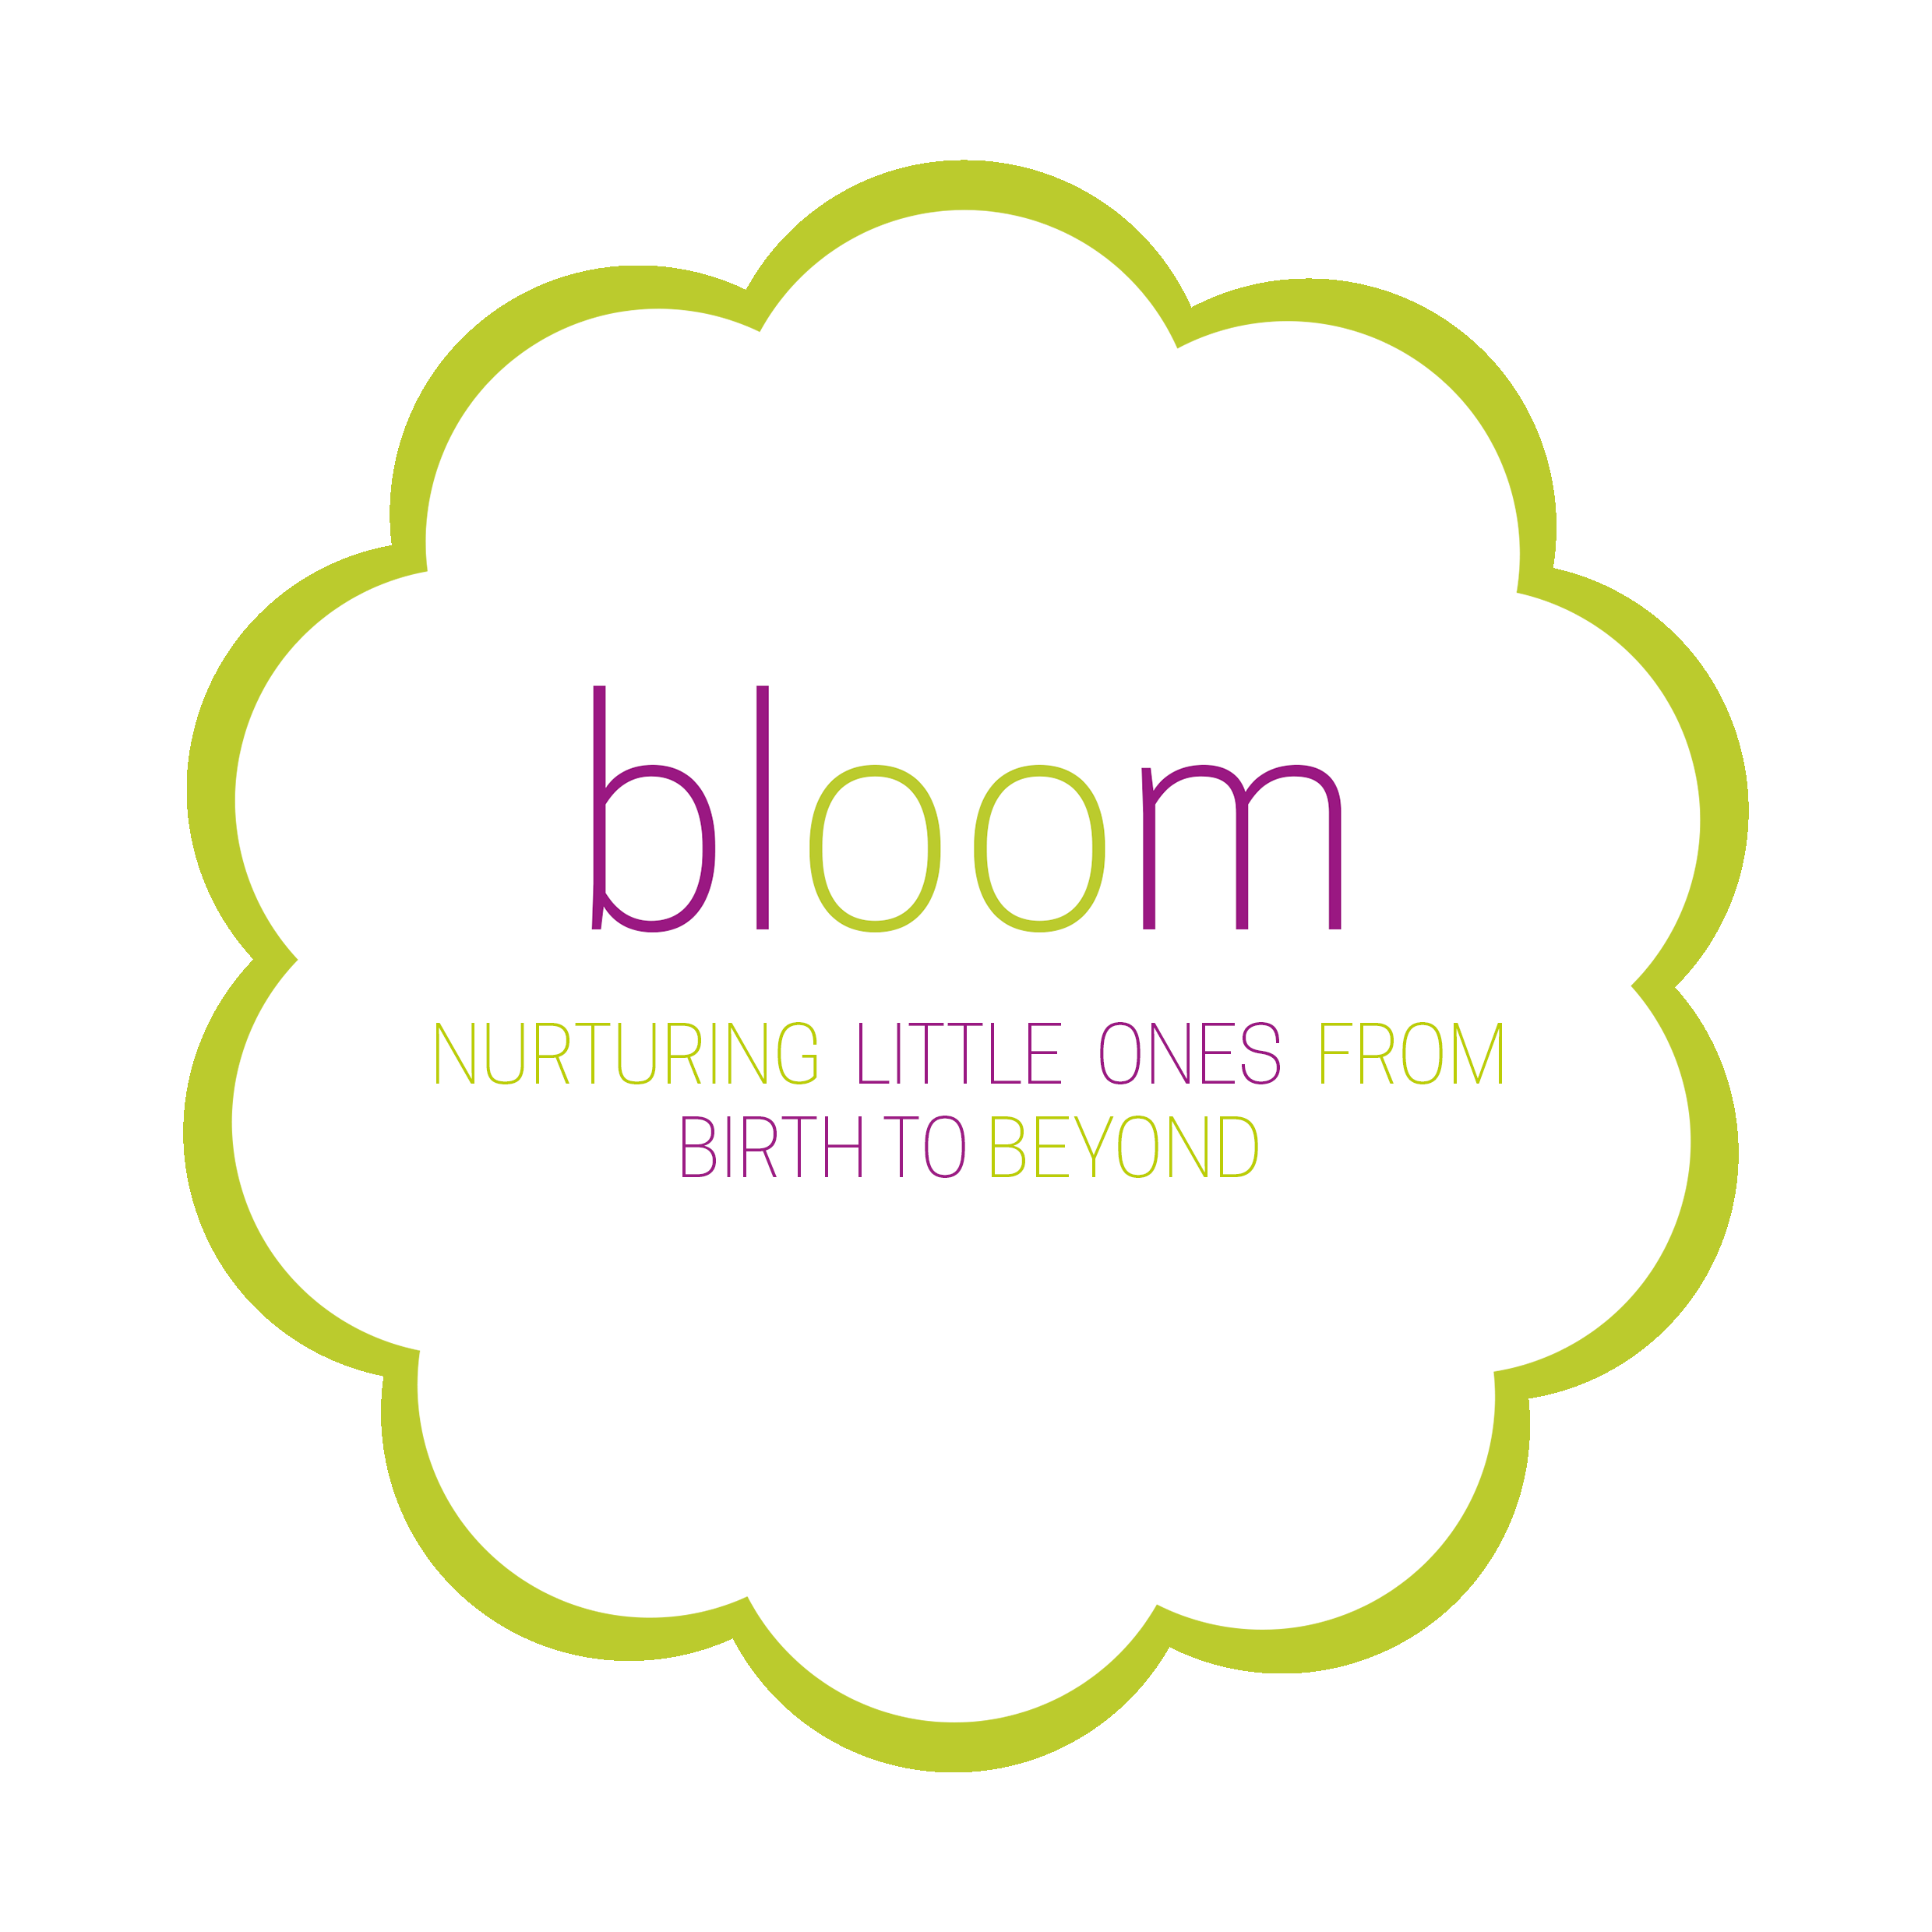  Baby Classes - Welcome to Bloom Baby Classes.